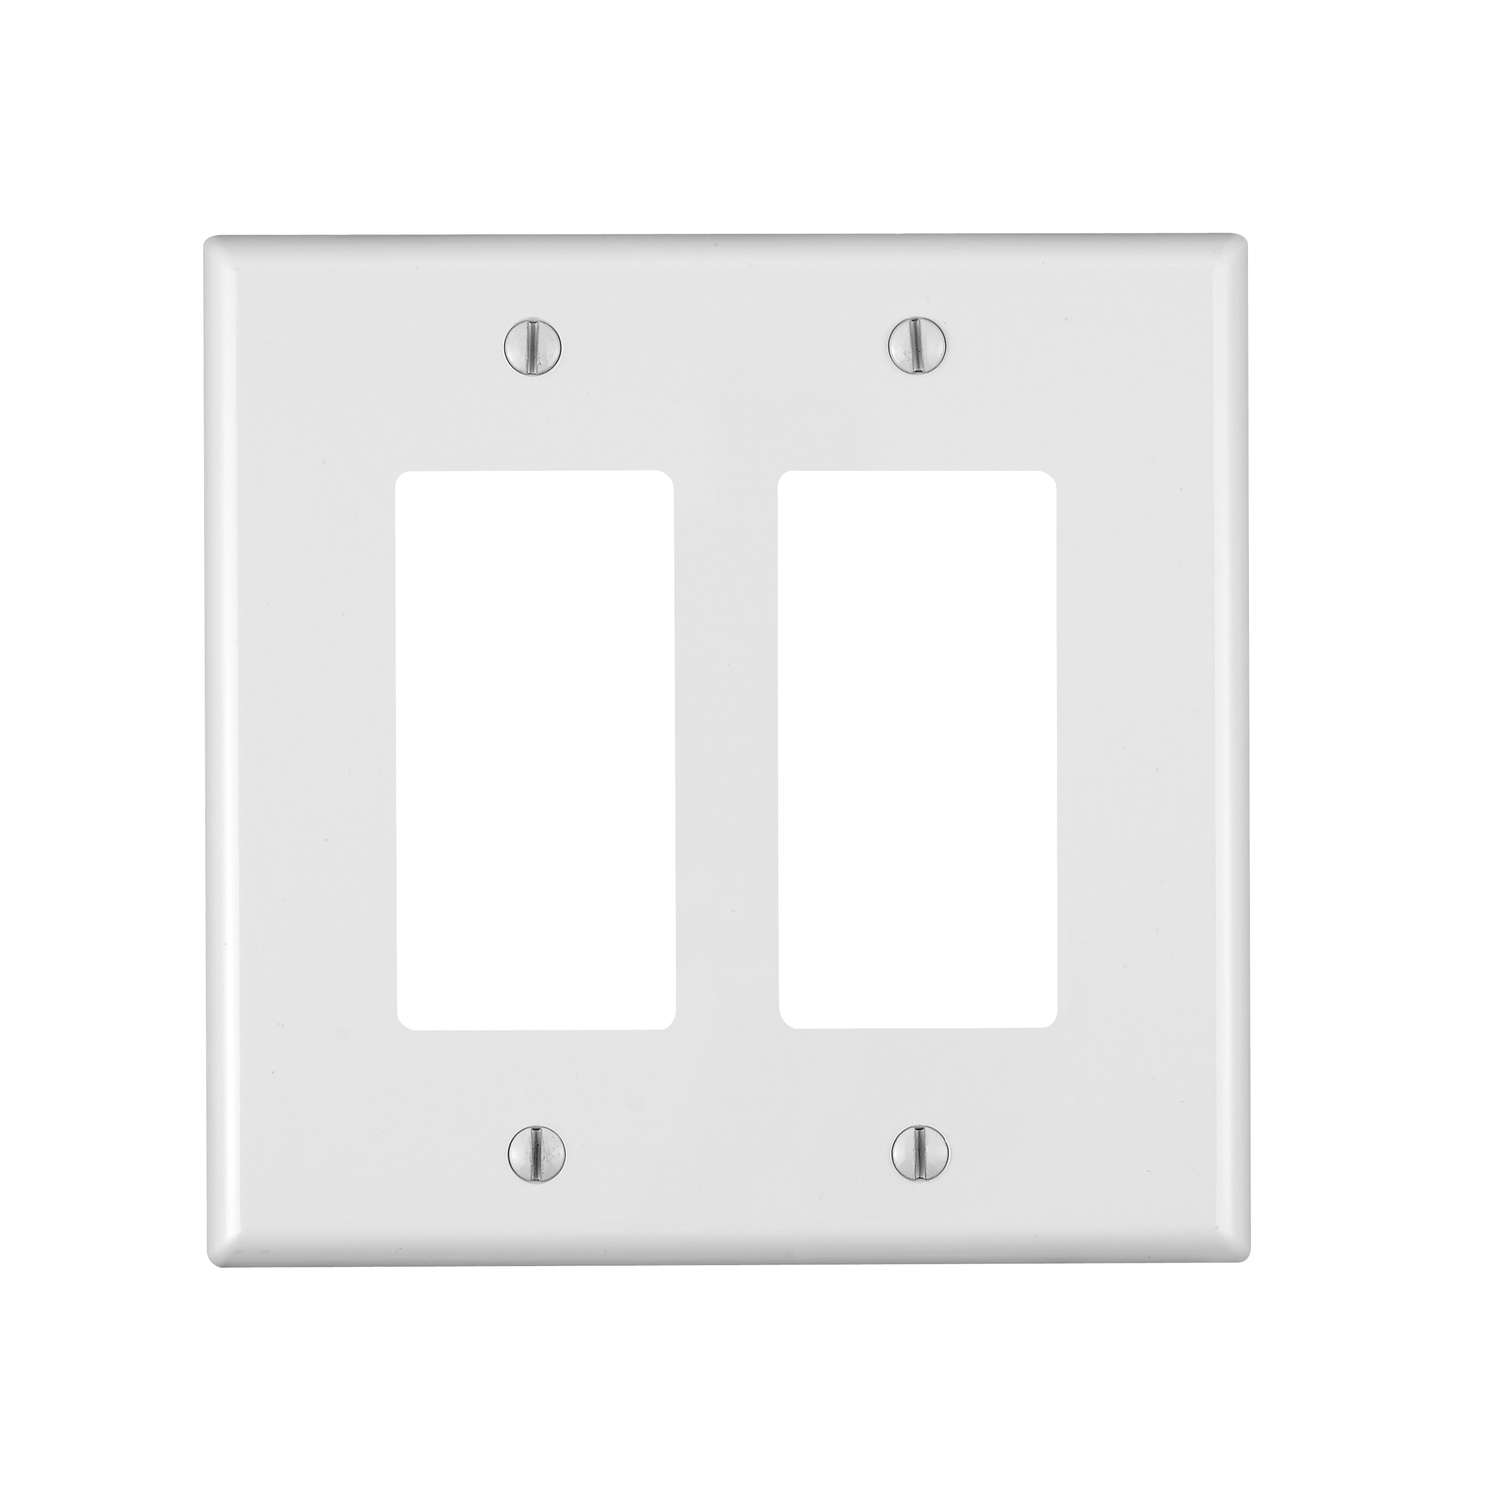 2-Gang Device Receptacle Wallplate Light Panel Cover Underwater World Ocean Blue Dolphin Oil Painting Double Outlet Wall Plate/Panel Plate/Cover Decoration Wallplate 